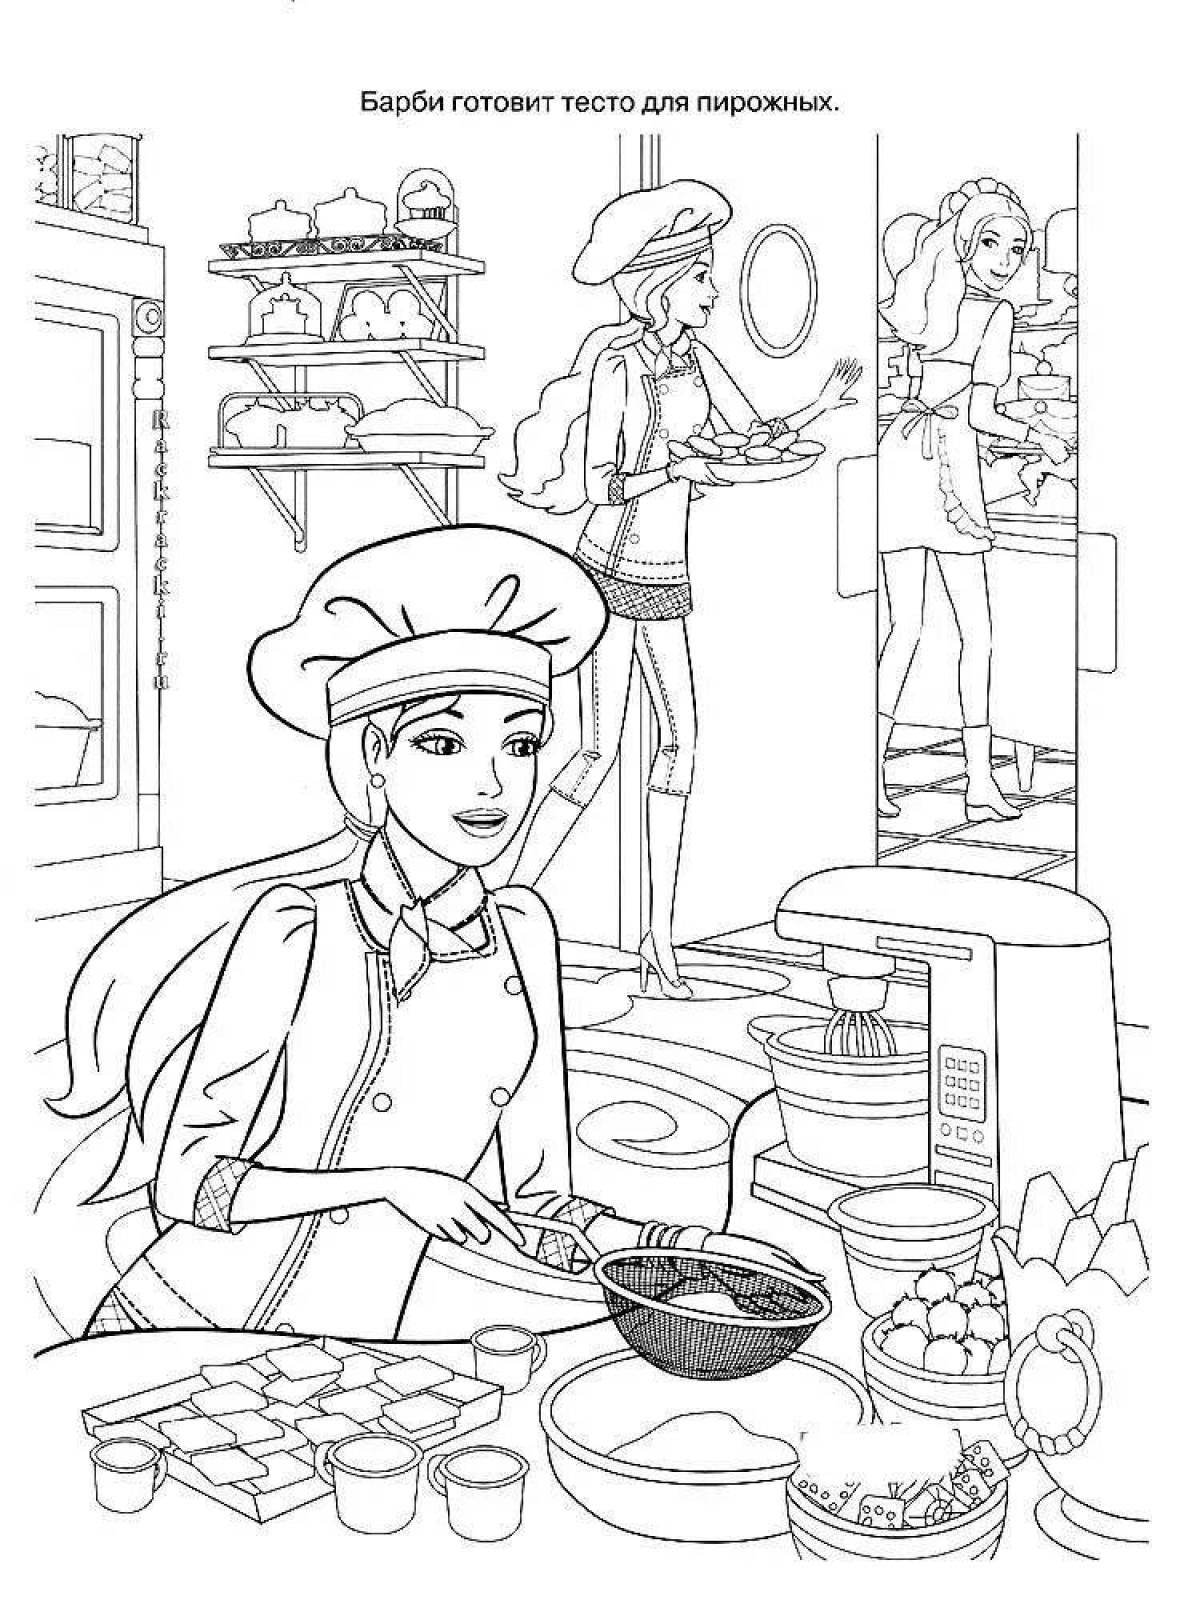 Pastry Chef's vibrant coloring page